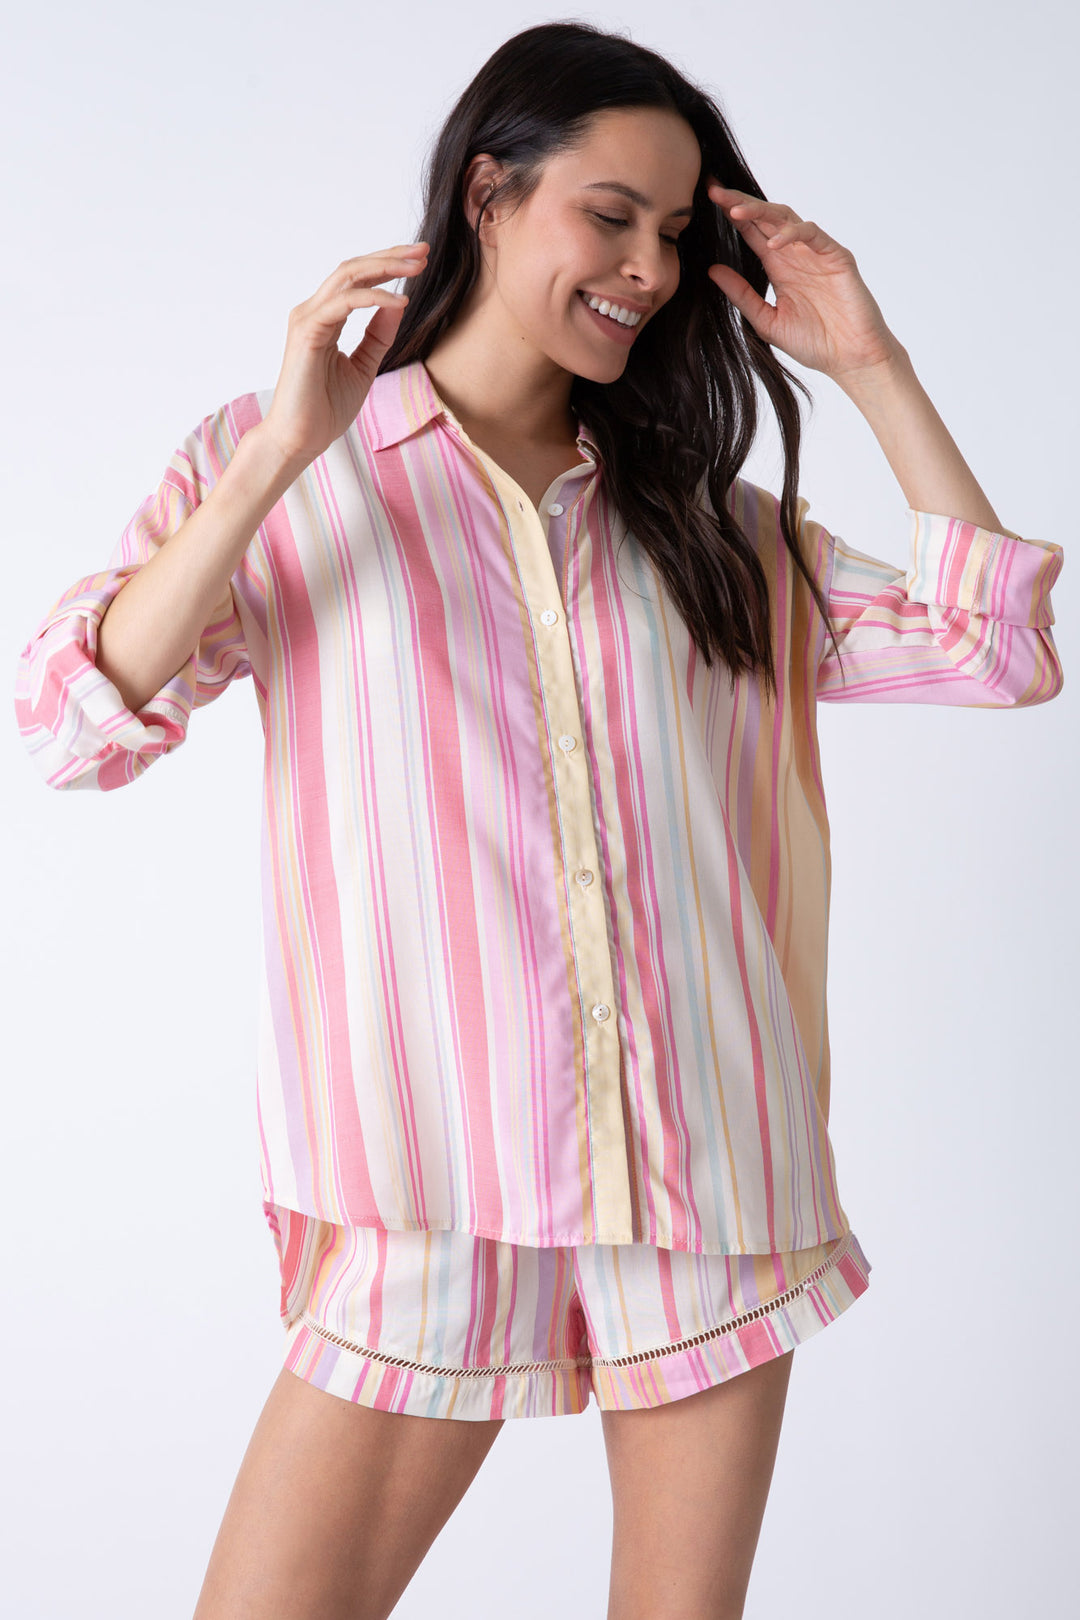 Women's striped button down shirt in pink-peach-natural. Collar & roll-up tab sleeve.